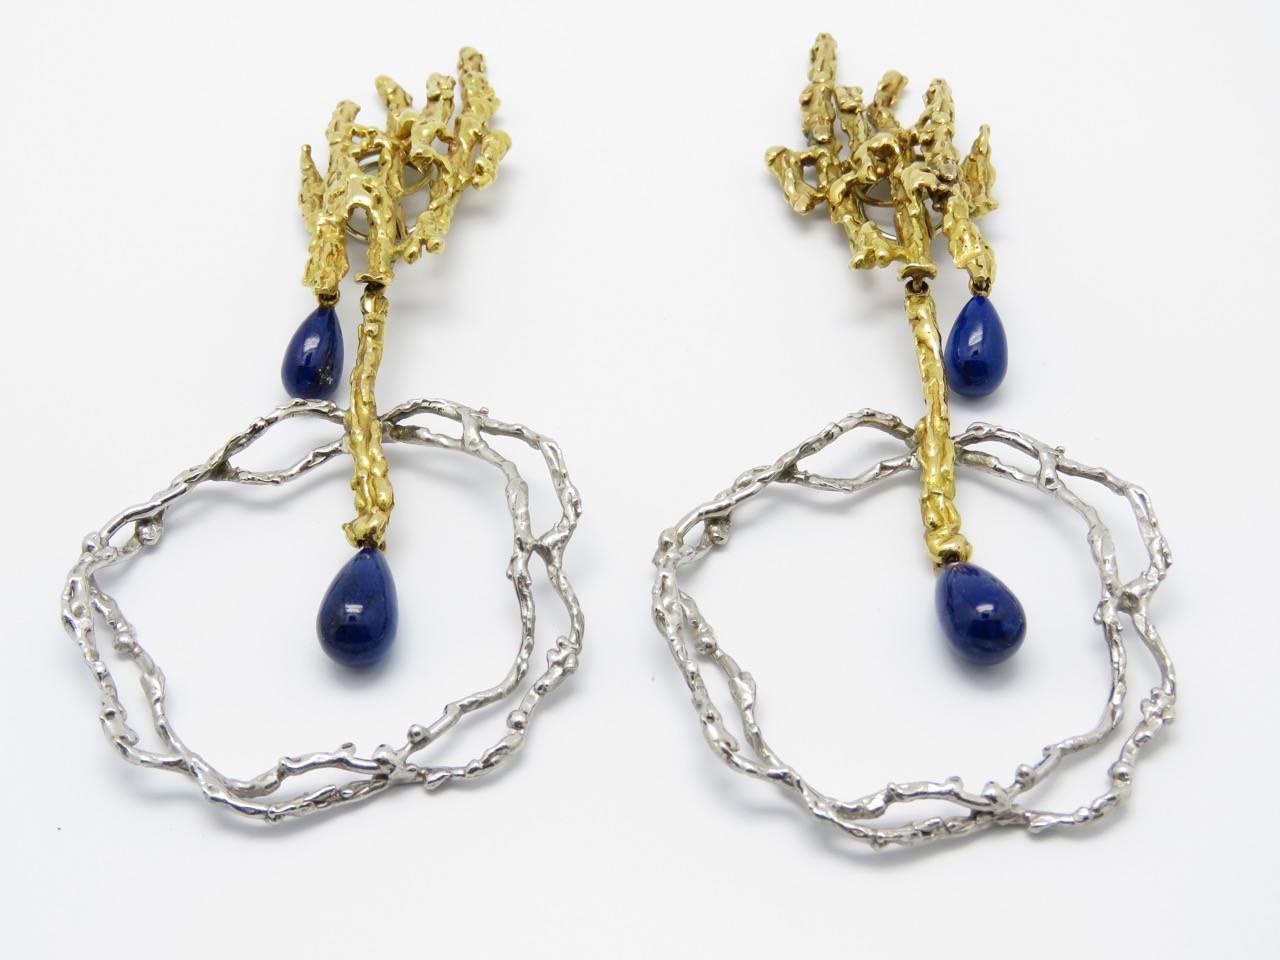 Earring clips that can be transformed.
Each asymmetrical face is composed of textured 18k yellow gold ending with a lapis lazuli drop and holding by a yellow gold segment a textured grey gold double ring.
The grey gold part can be detached.
It